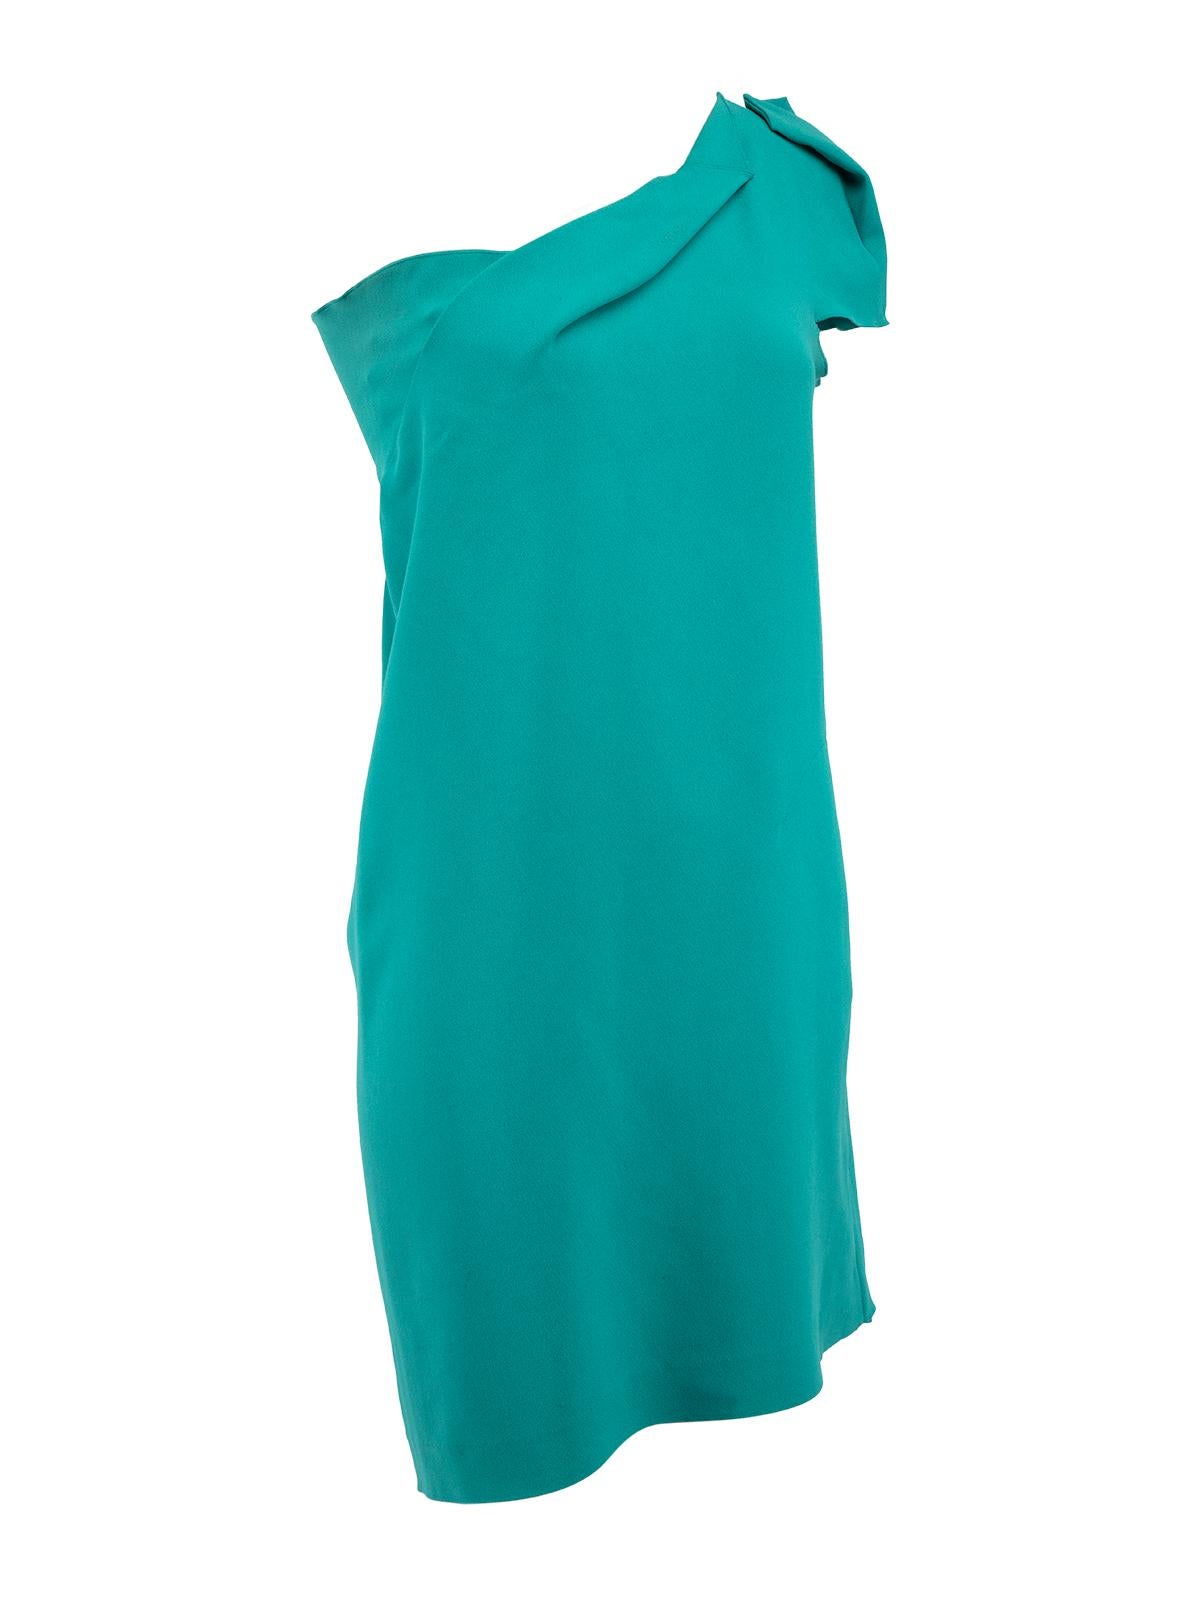 CONDITION is Very good. Minimal wear to dress is evident. Minimal pilling to outer material around the neckline on this used Roland Mouret designer resale item.  Details  Turquoise Viscose, acetate blend Mini dress One shoulder Ruffle neckline and